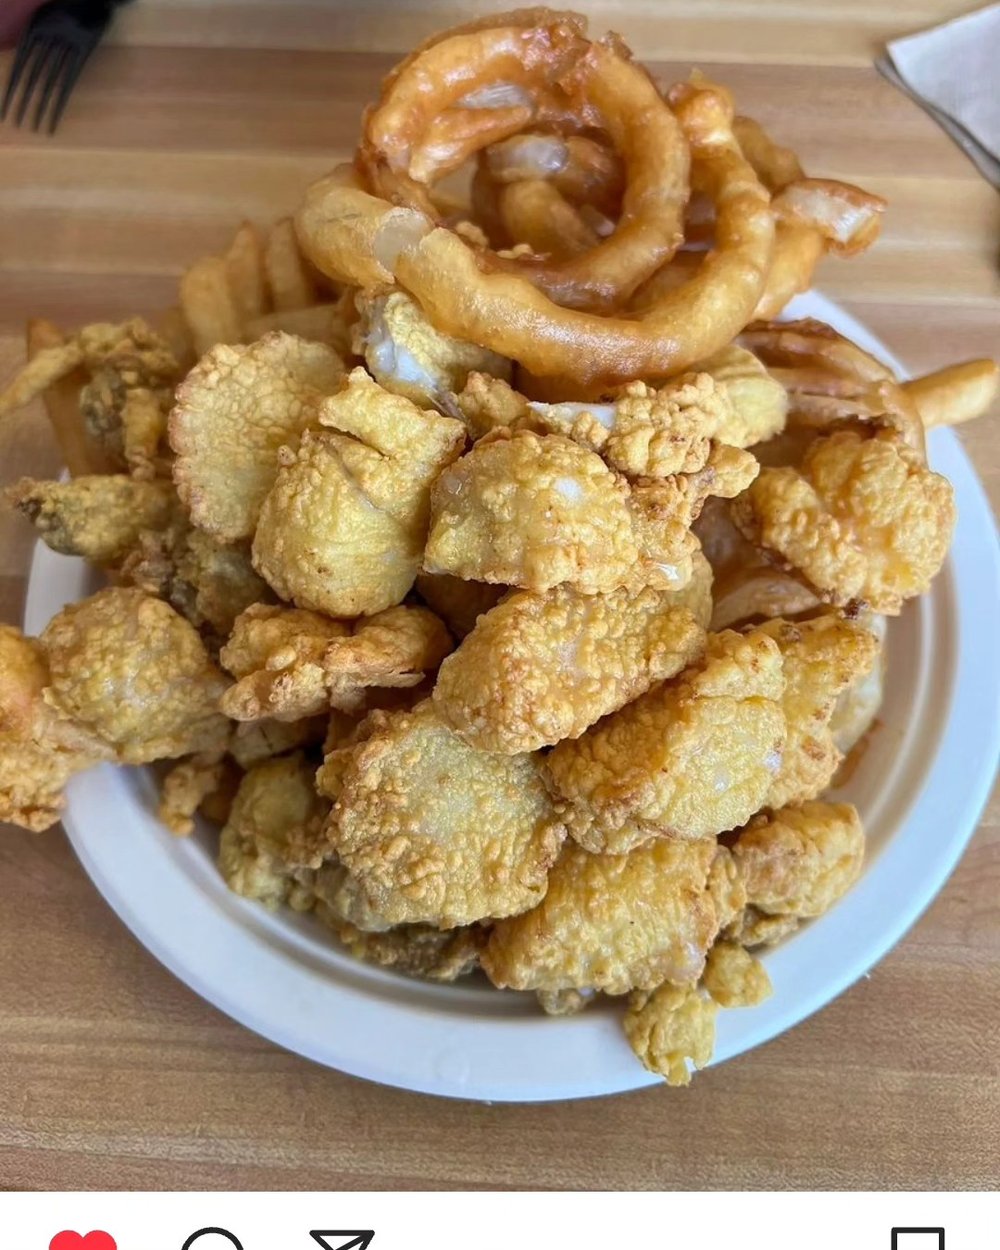 fried fish and onion rings.jpg